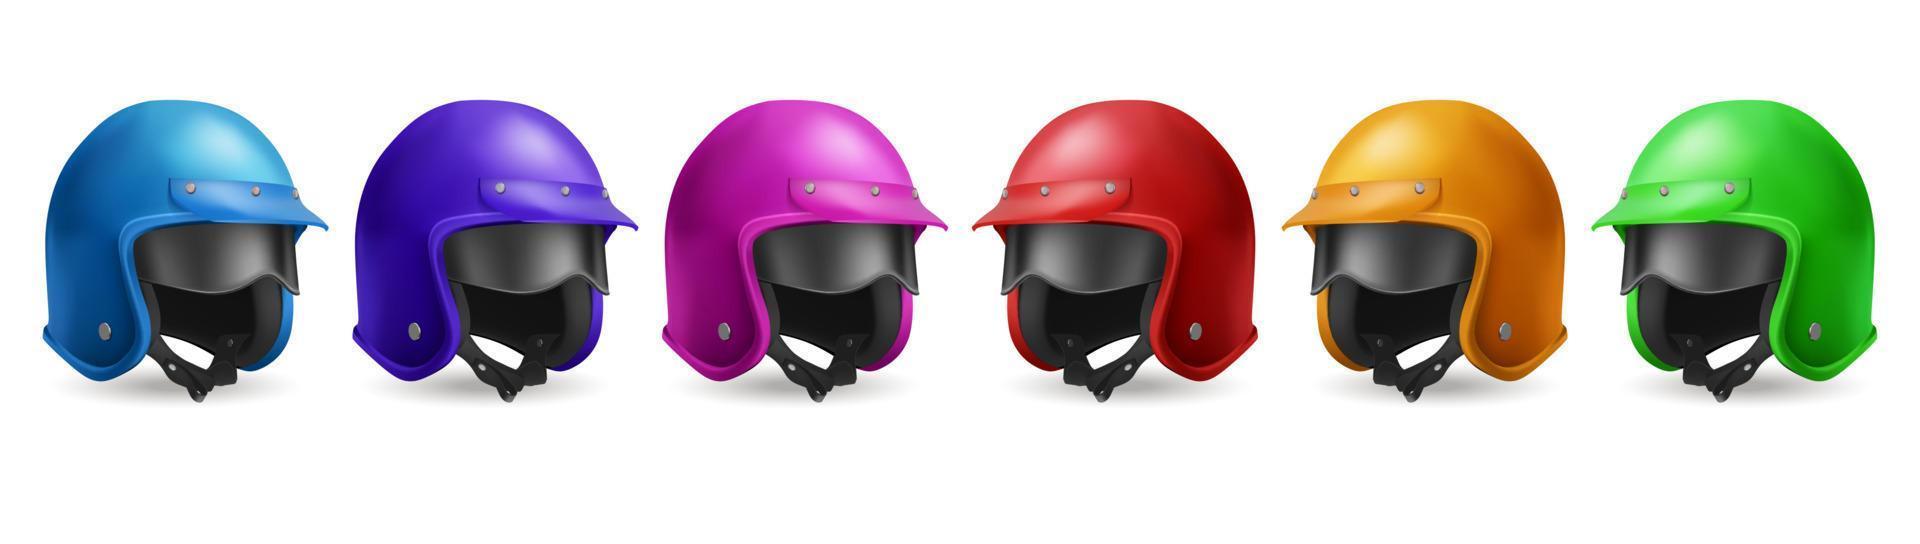 Motorcycle helmet set for race and ride on scooter vector